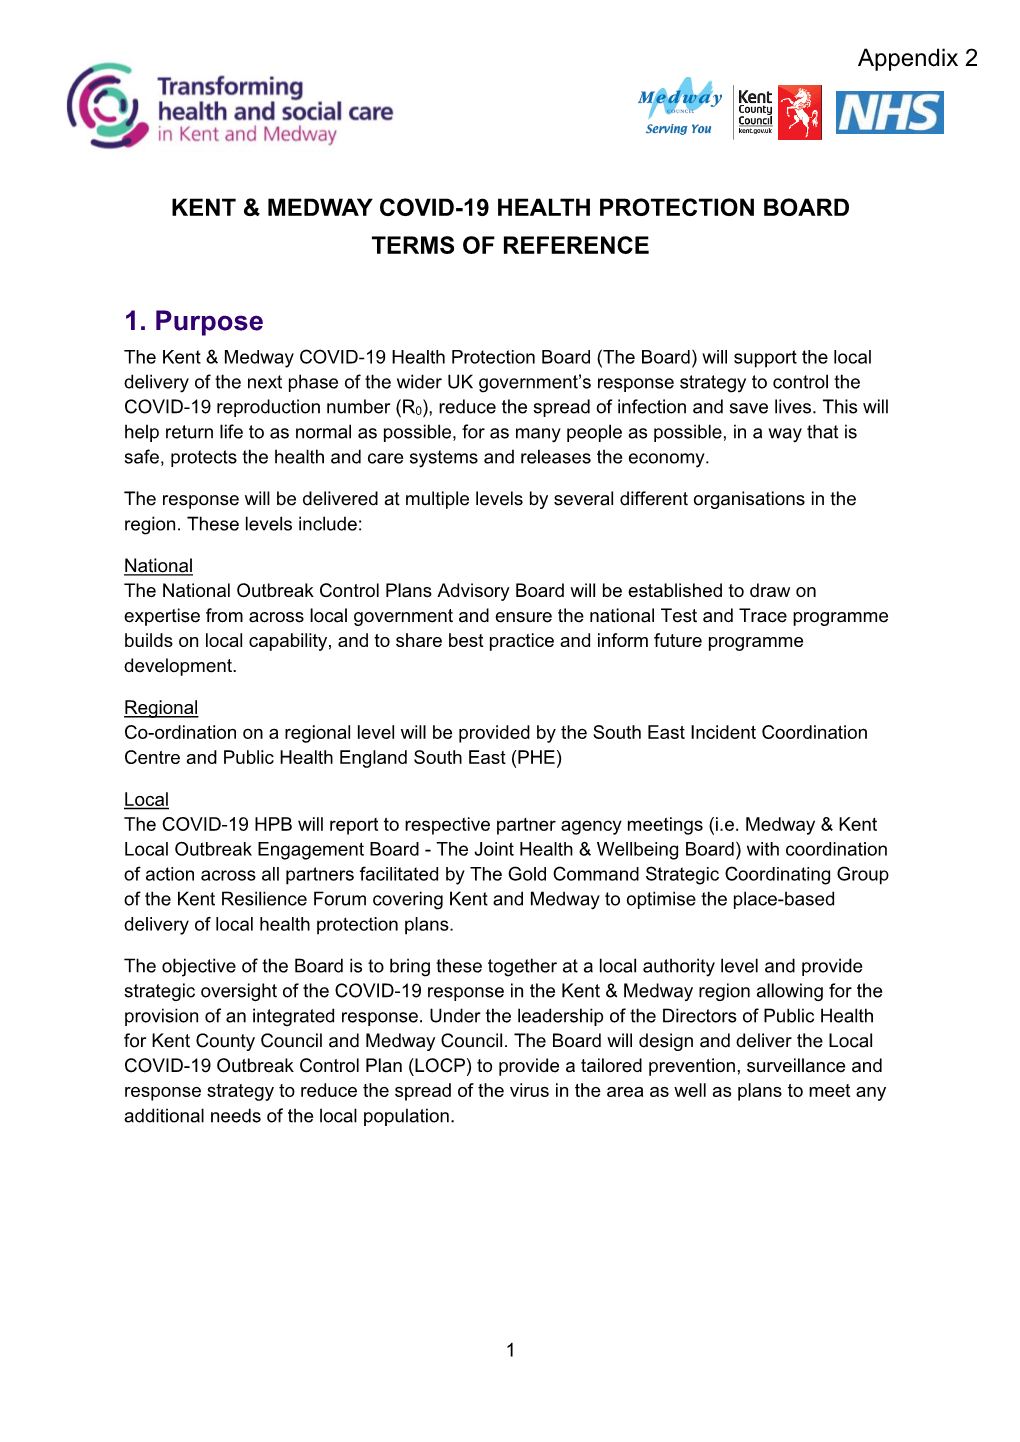 Kent & Medway Covid-19 Health Protection Board Terms of Reference